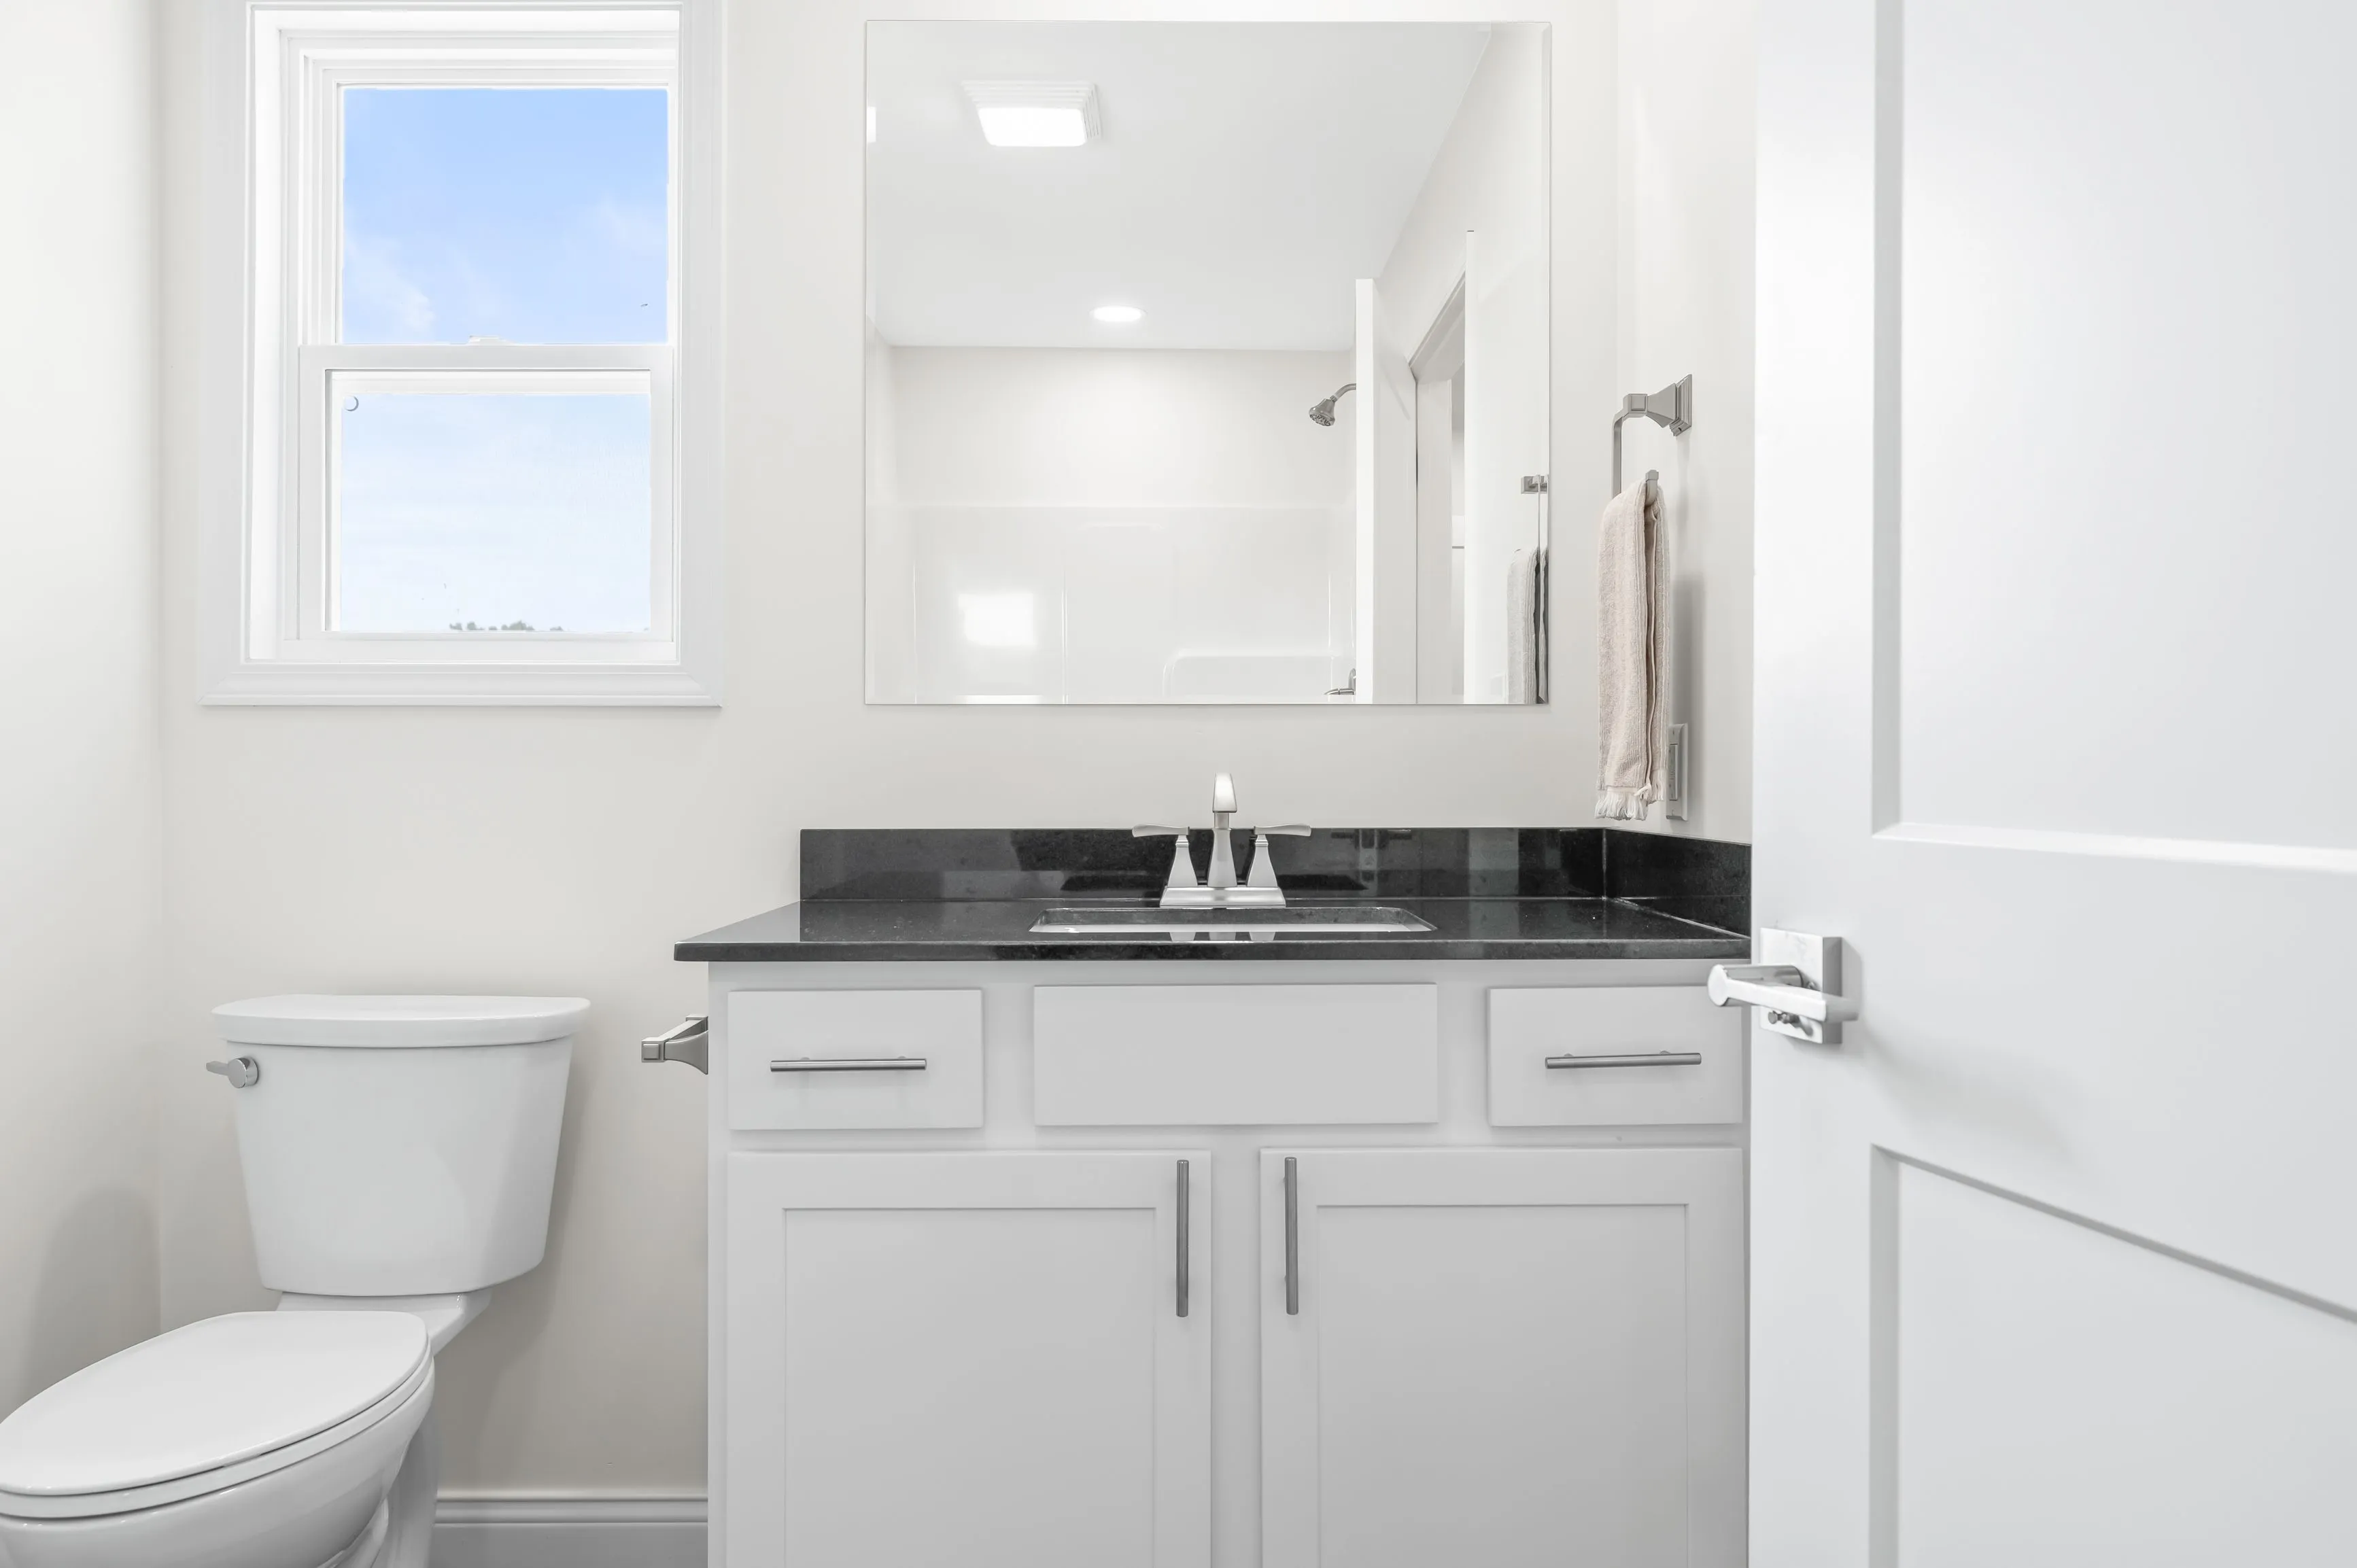 Modern bathroom interior with white walls, featuring a vanity with a black countertop, sink, mirror, and a toilet next to a window.